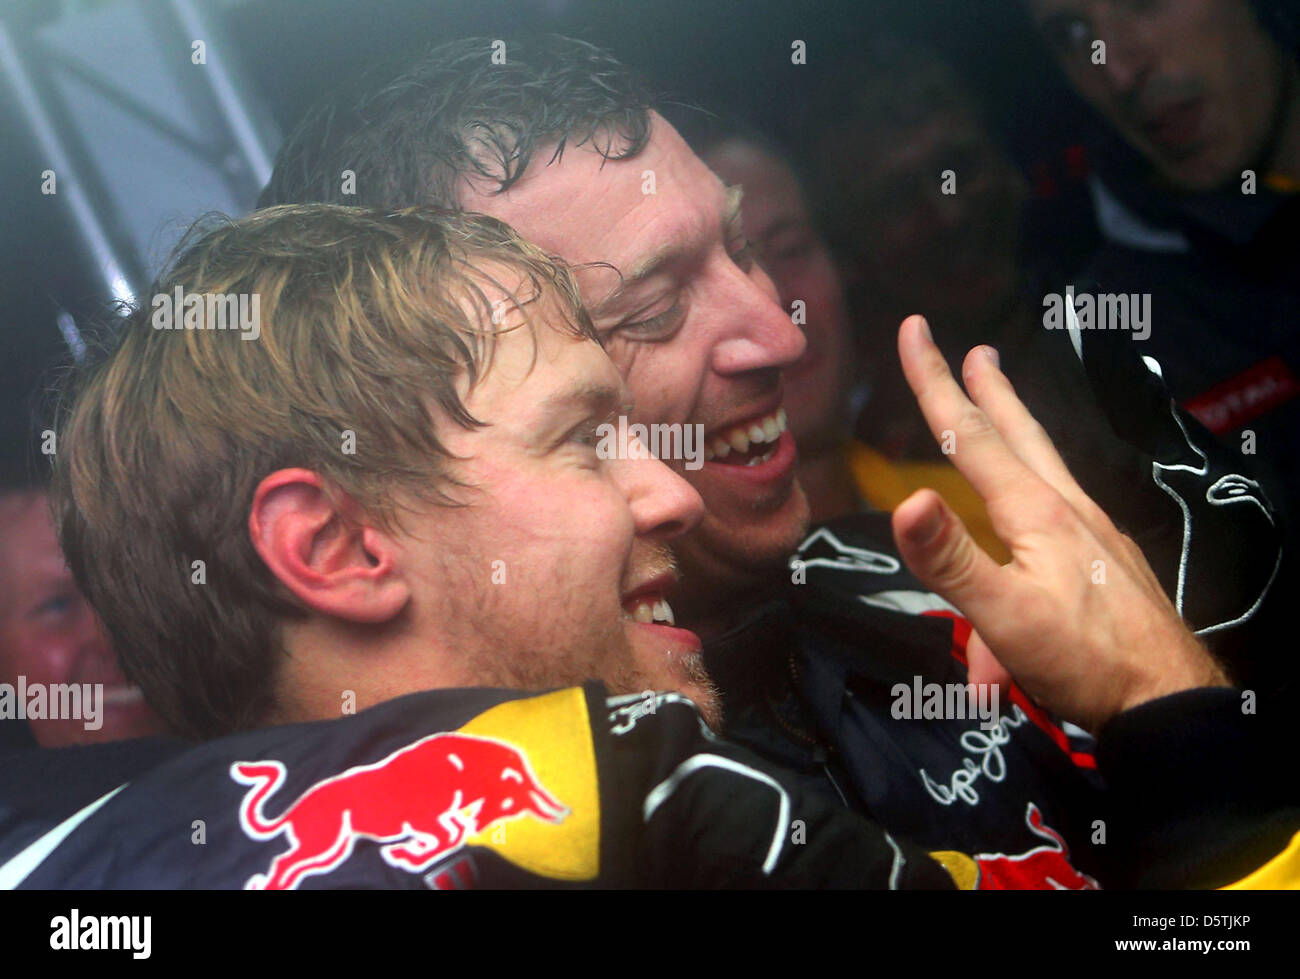 German Formula One driver Sebastian Vettel of Red Bull celebrates his third world championship in a row in the teamgarage after the Formula One Grand Prix of Brazil at Autodromo Jose Carlos Pace in Sao Paulo, Brazil, 25 November 2012. Photo: Jens Buettner/dpa  +++(c) dpa - Bildfunk+++ Stock Photo